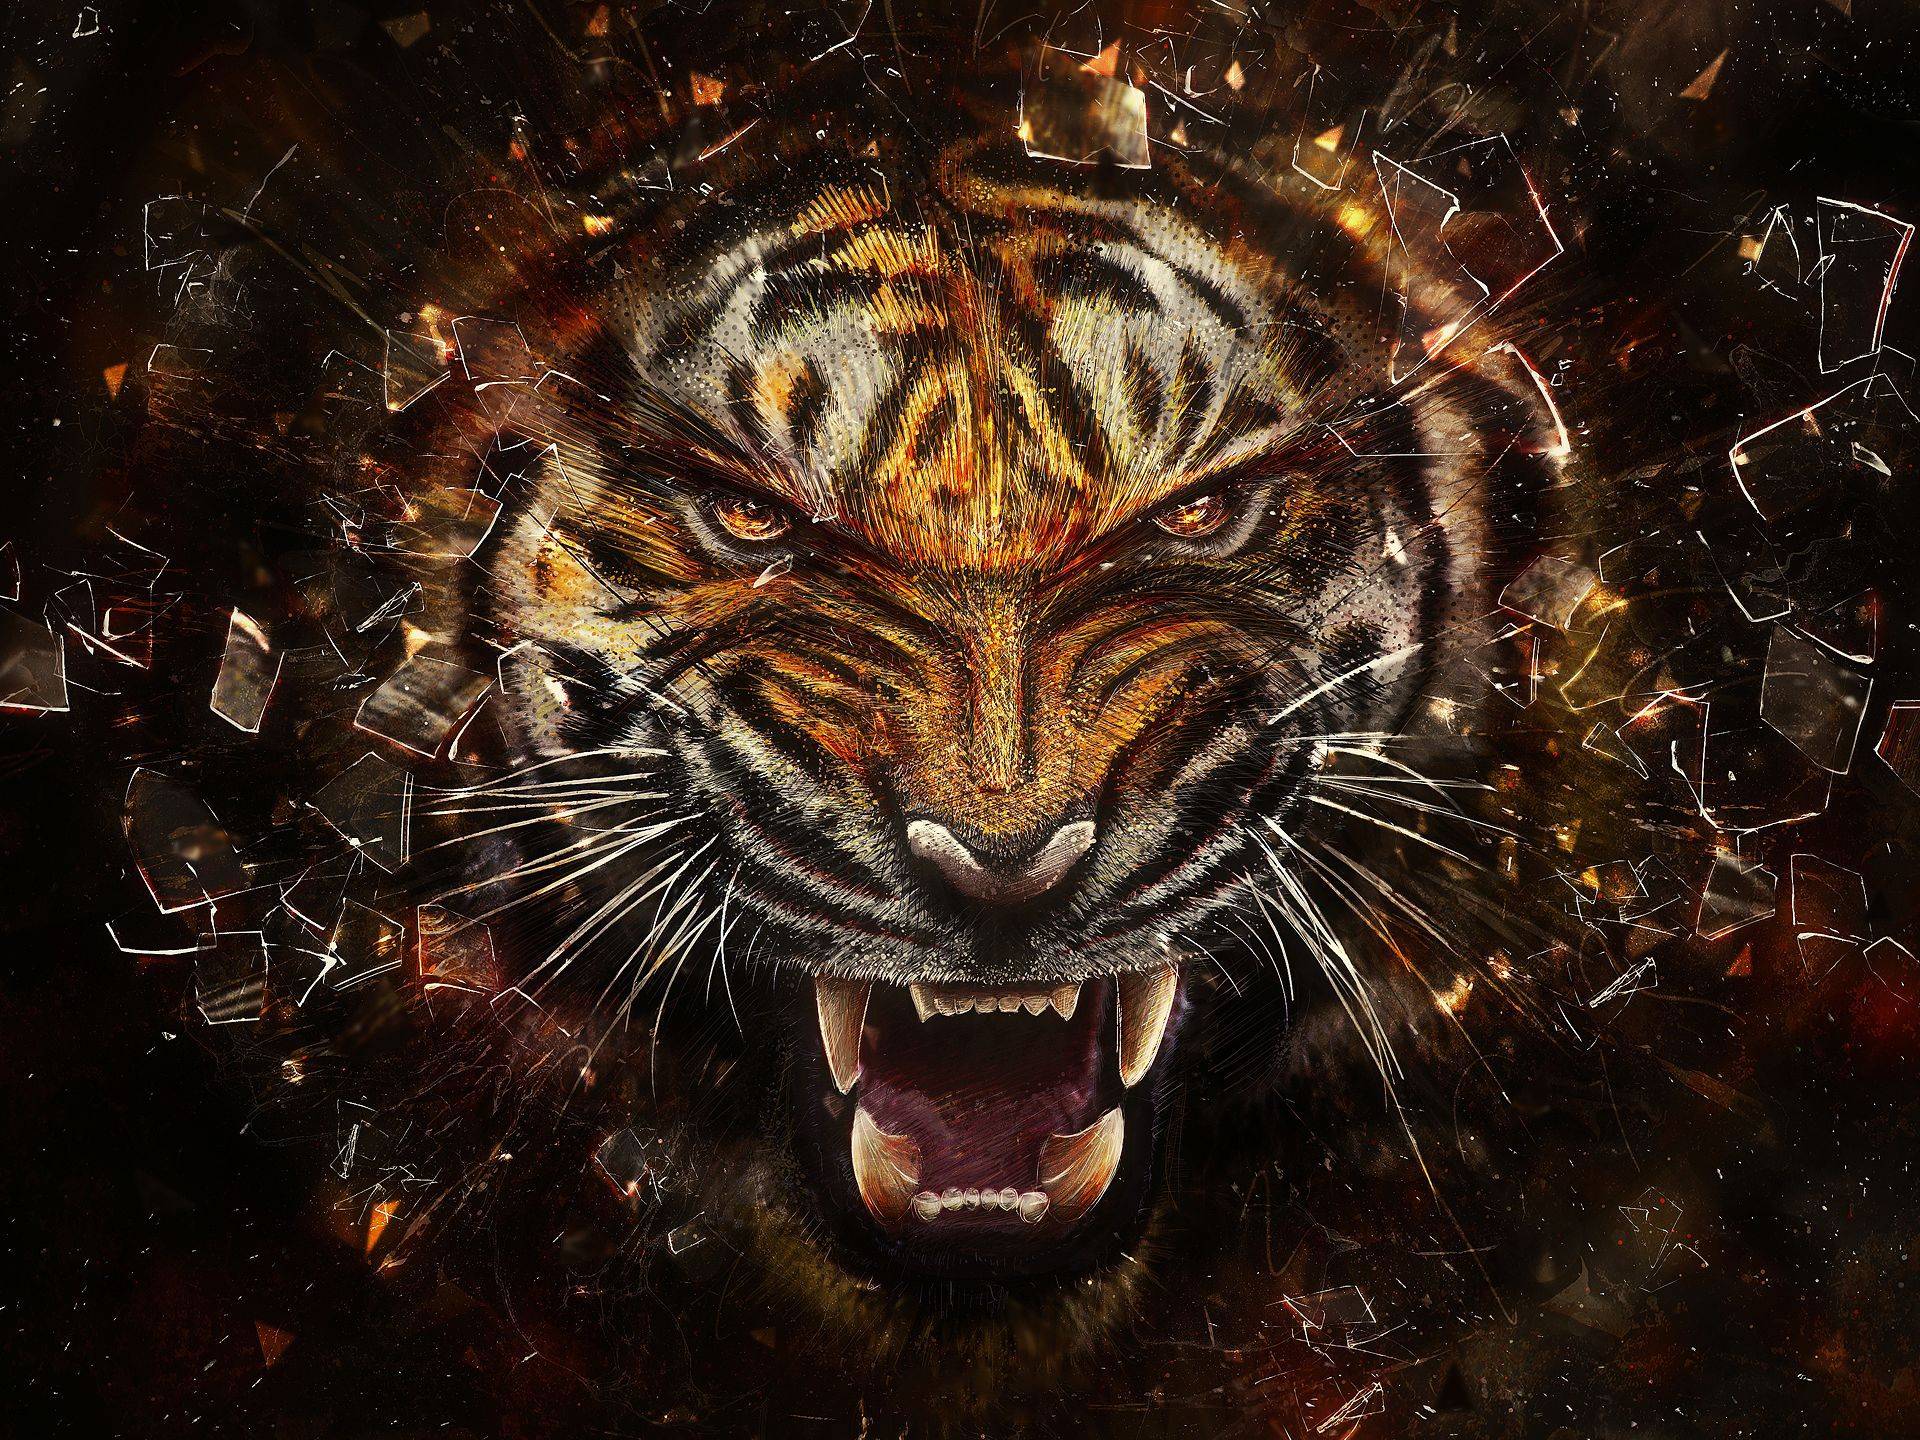 cool tiger pictures